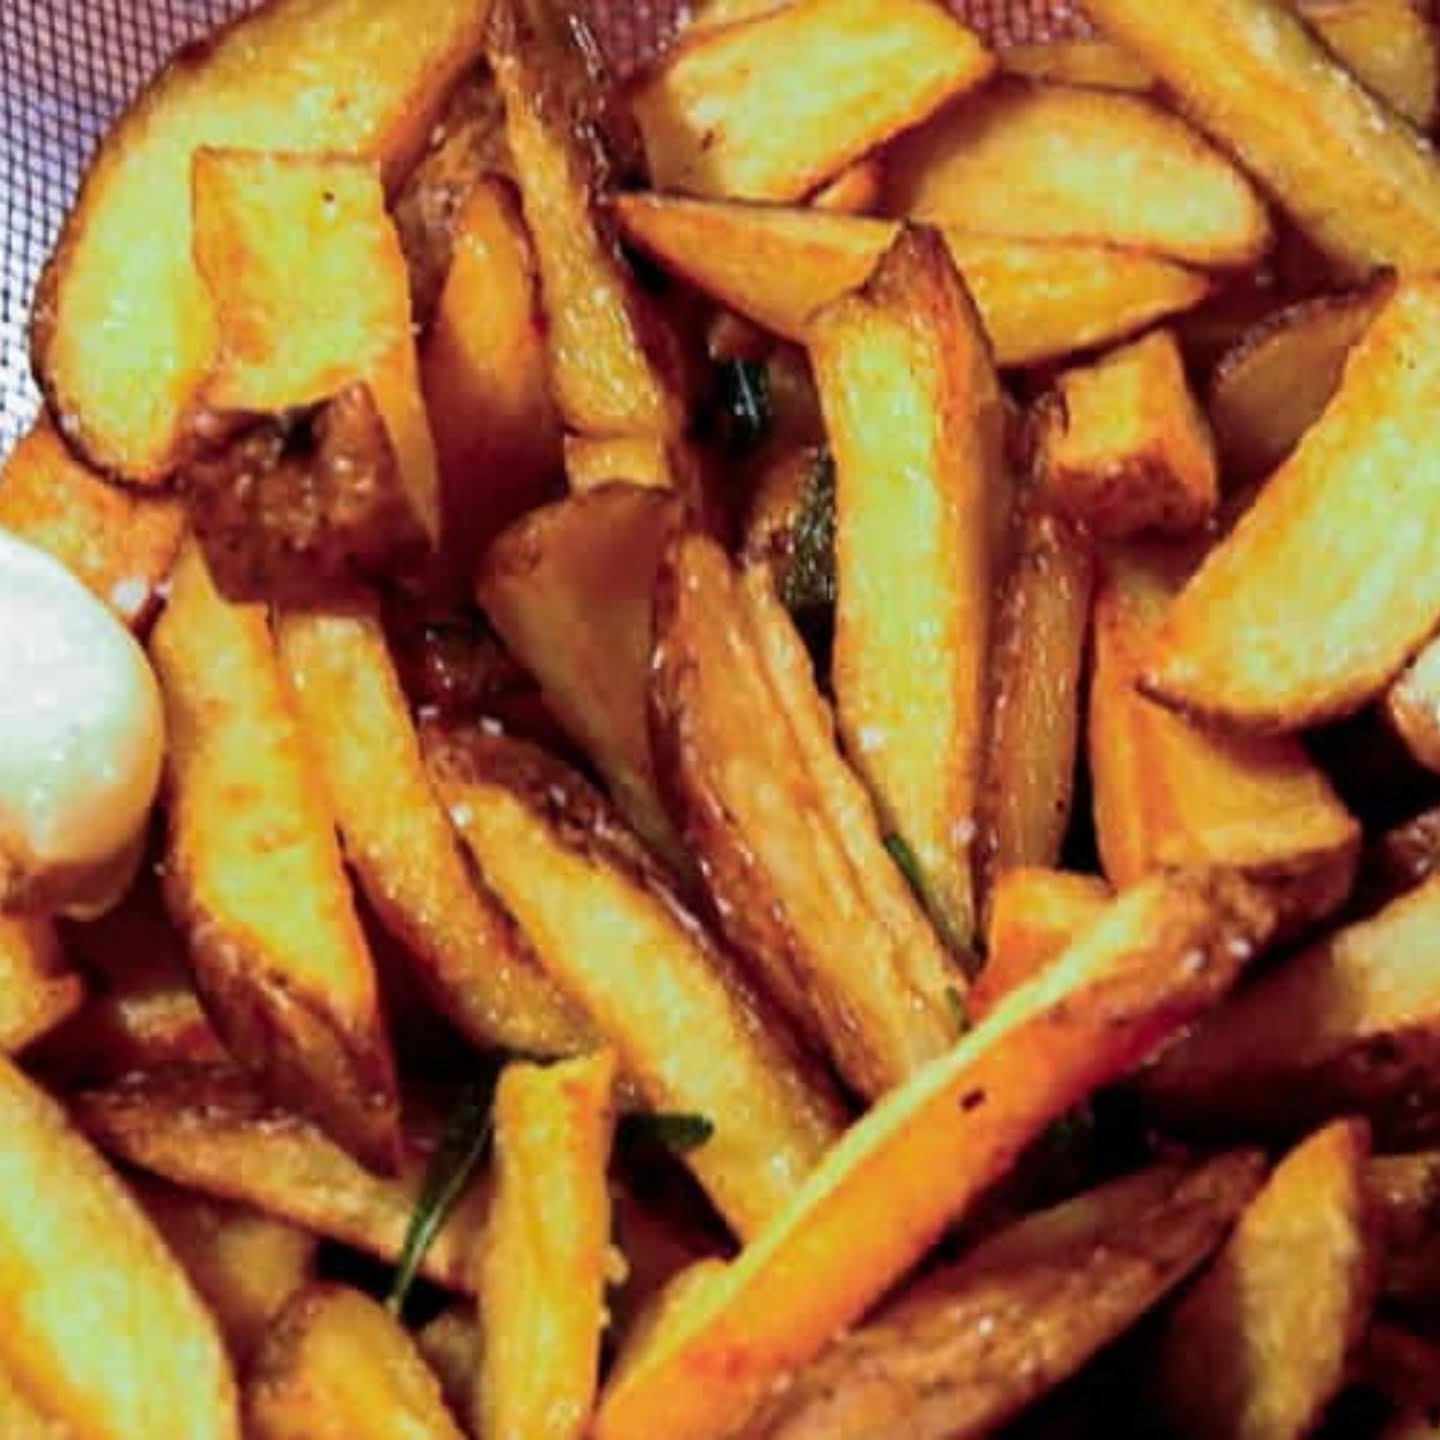 Italian-style French Fries with Garlic and Rosemary